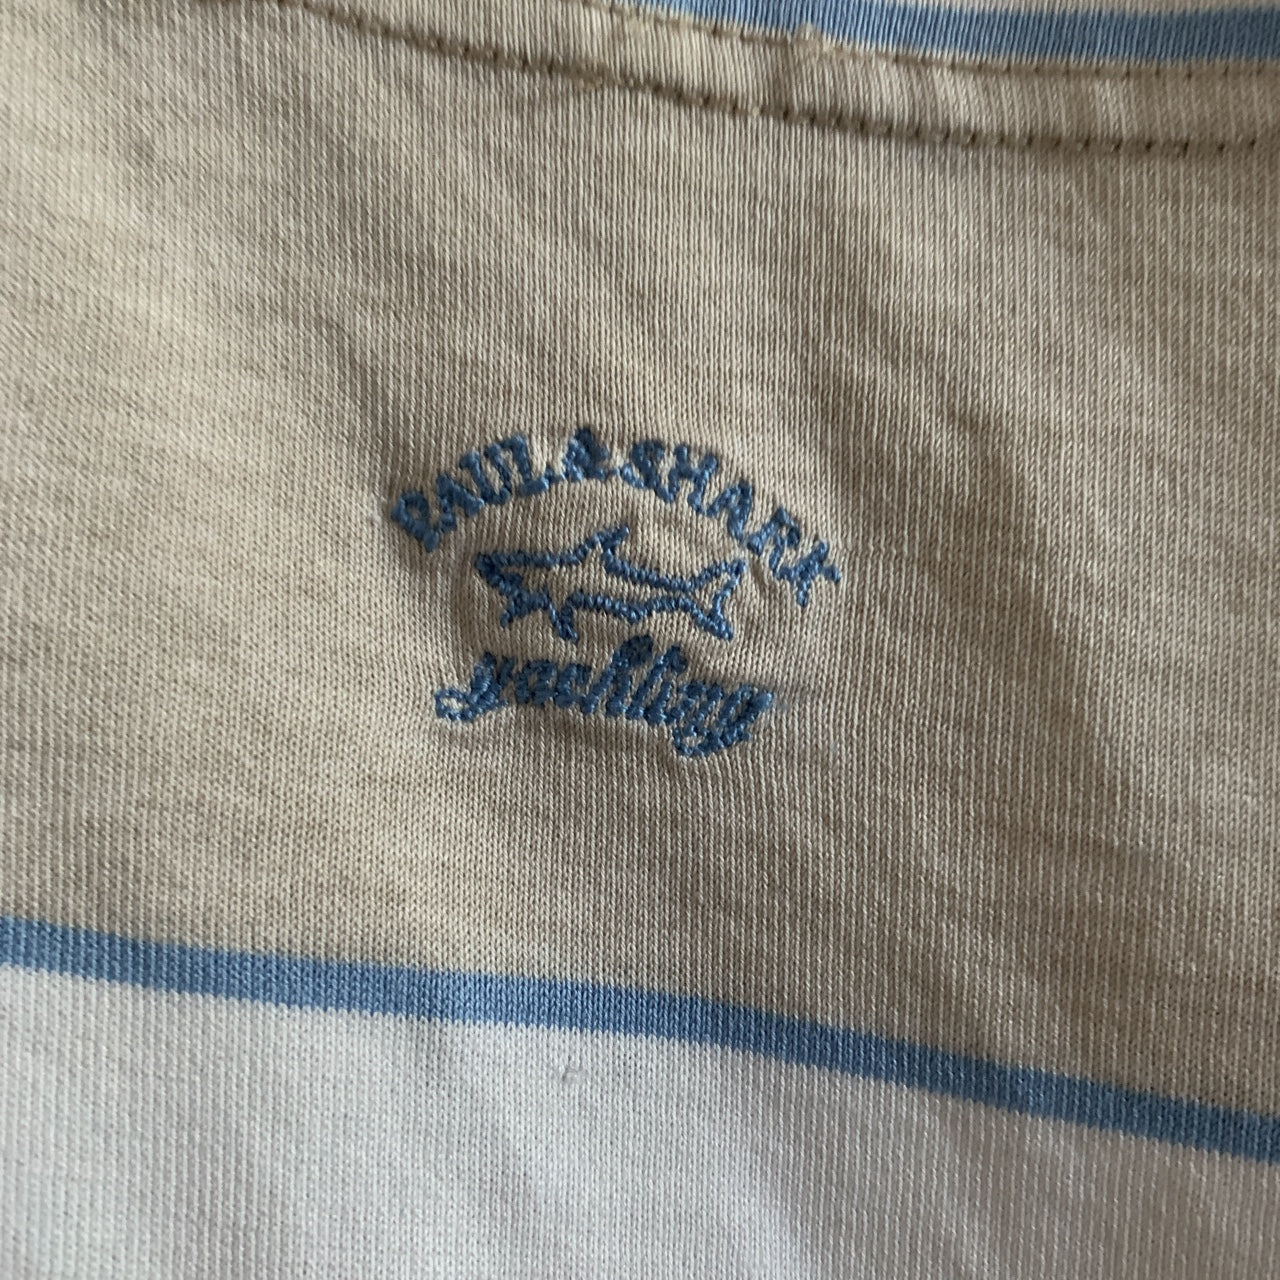 Paul & Shark Vintage Polo Shirt 100% Cotton Made In Italy Size L